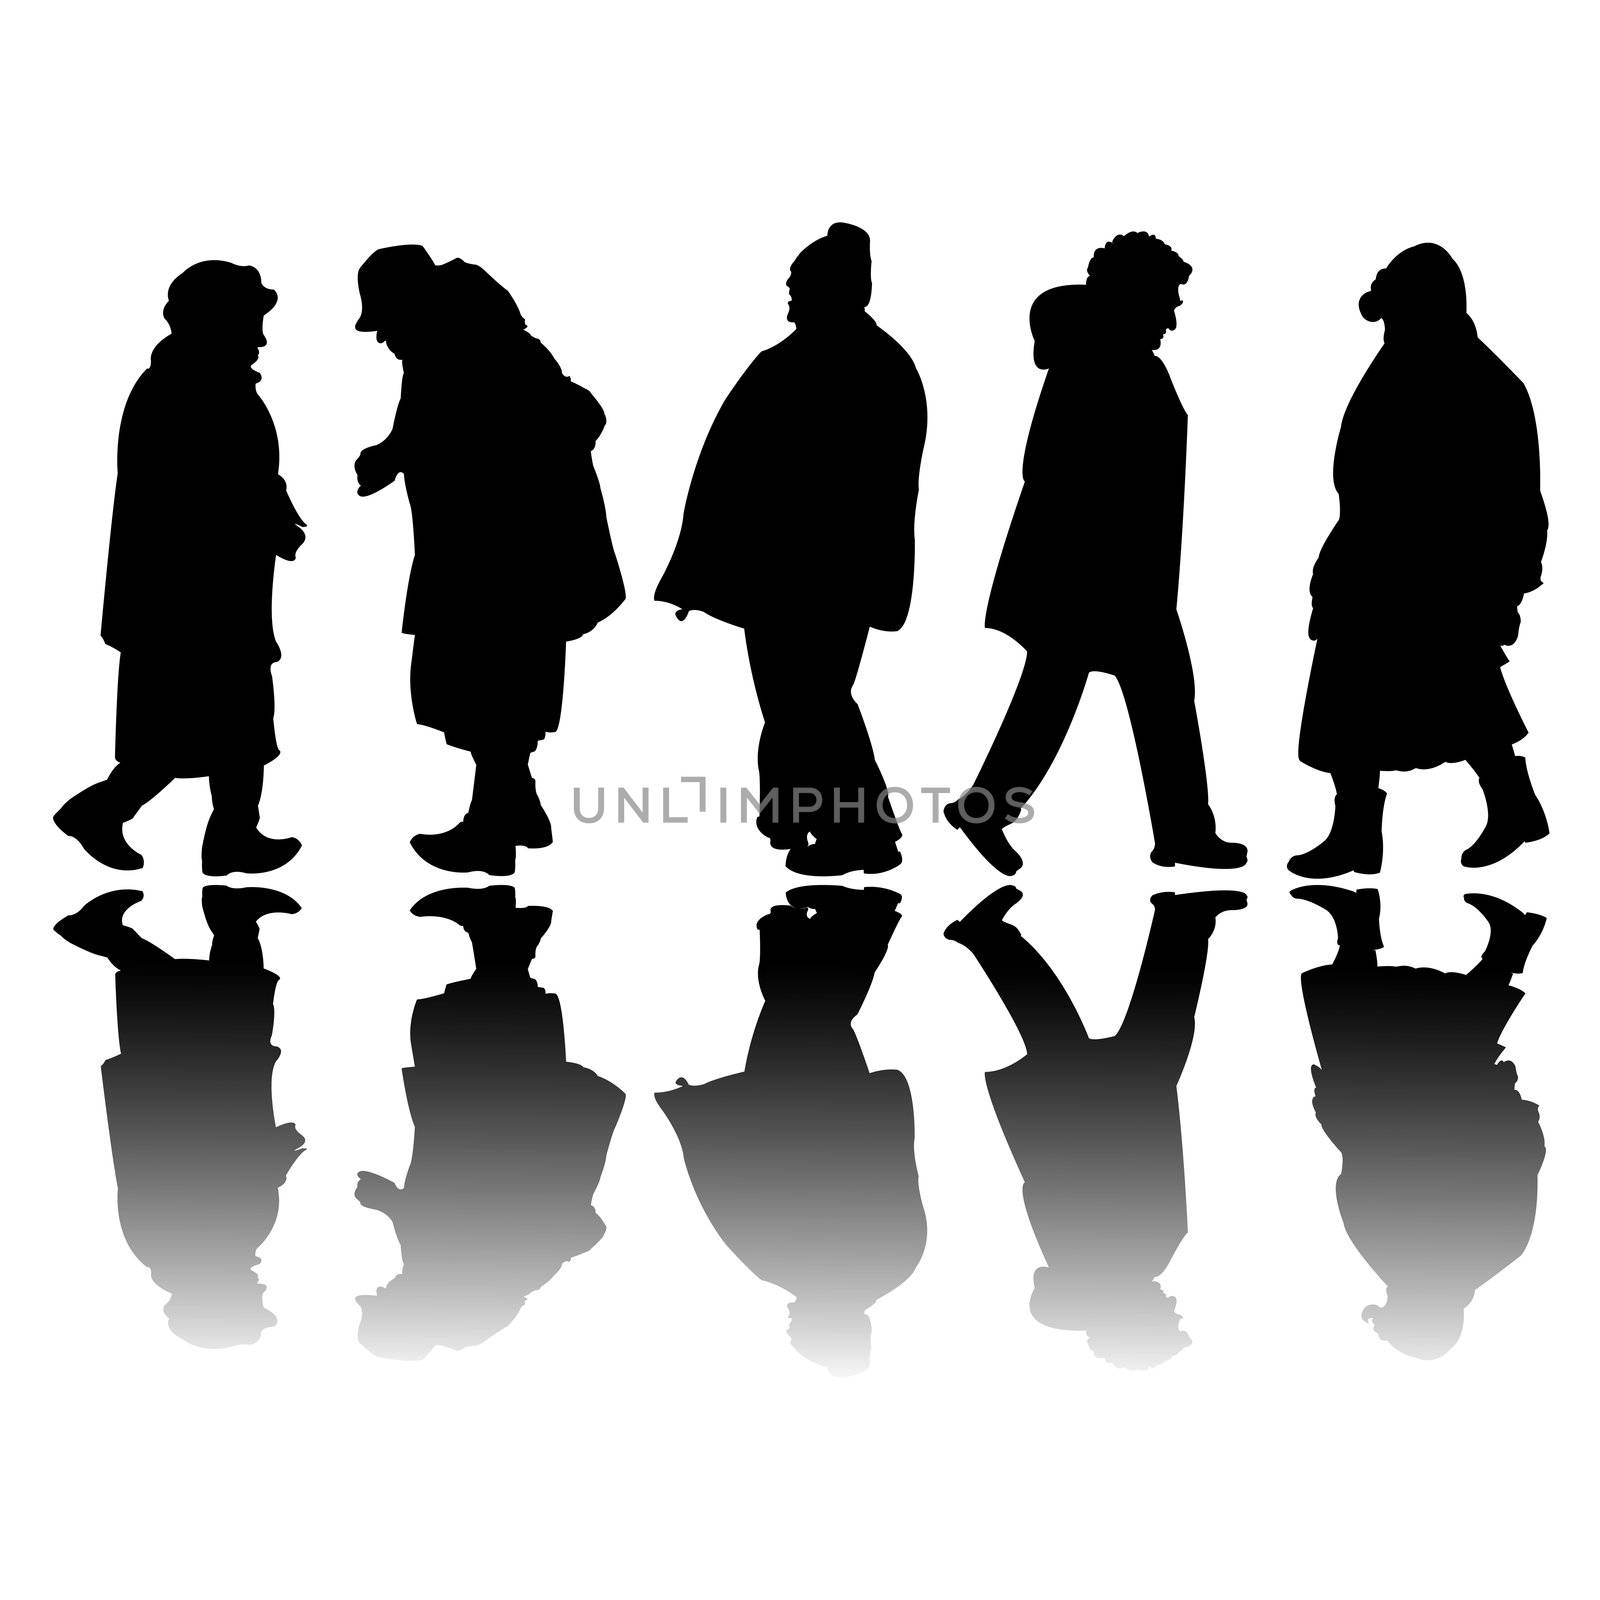 old people black silhouettes, abstract art illustration